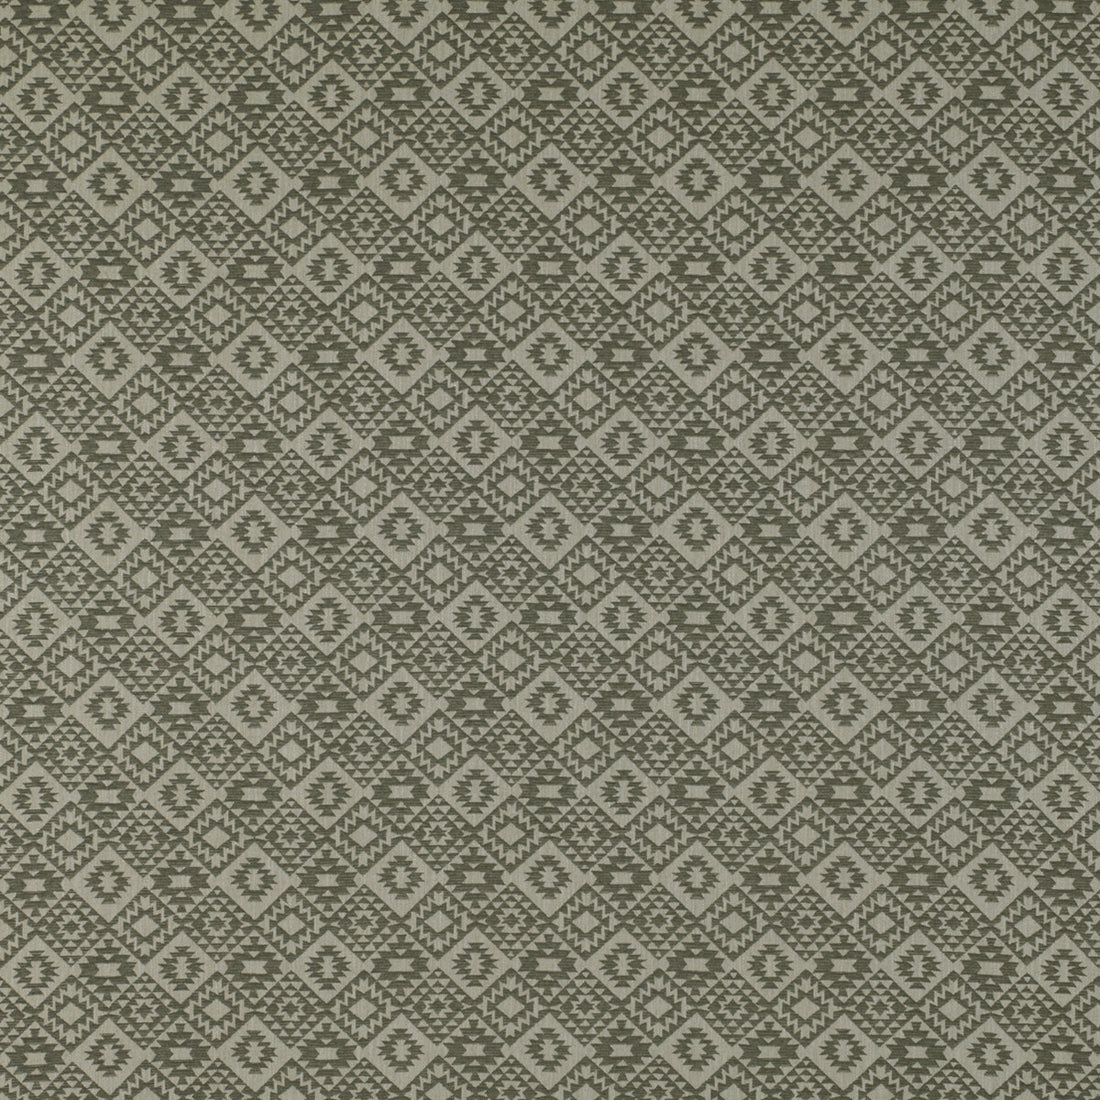 Lecco fabric in gris color - pattern GDT5323.002.0 - by Gaston y Daniela in the Tierras collection